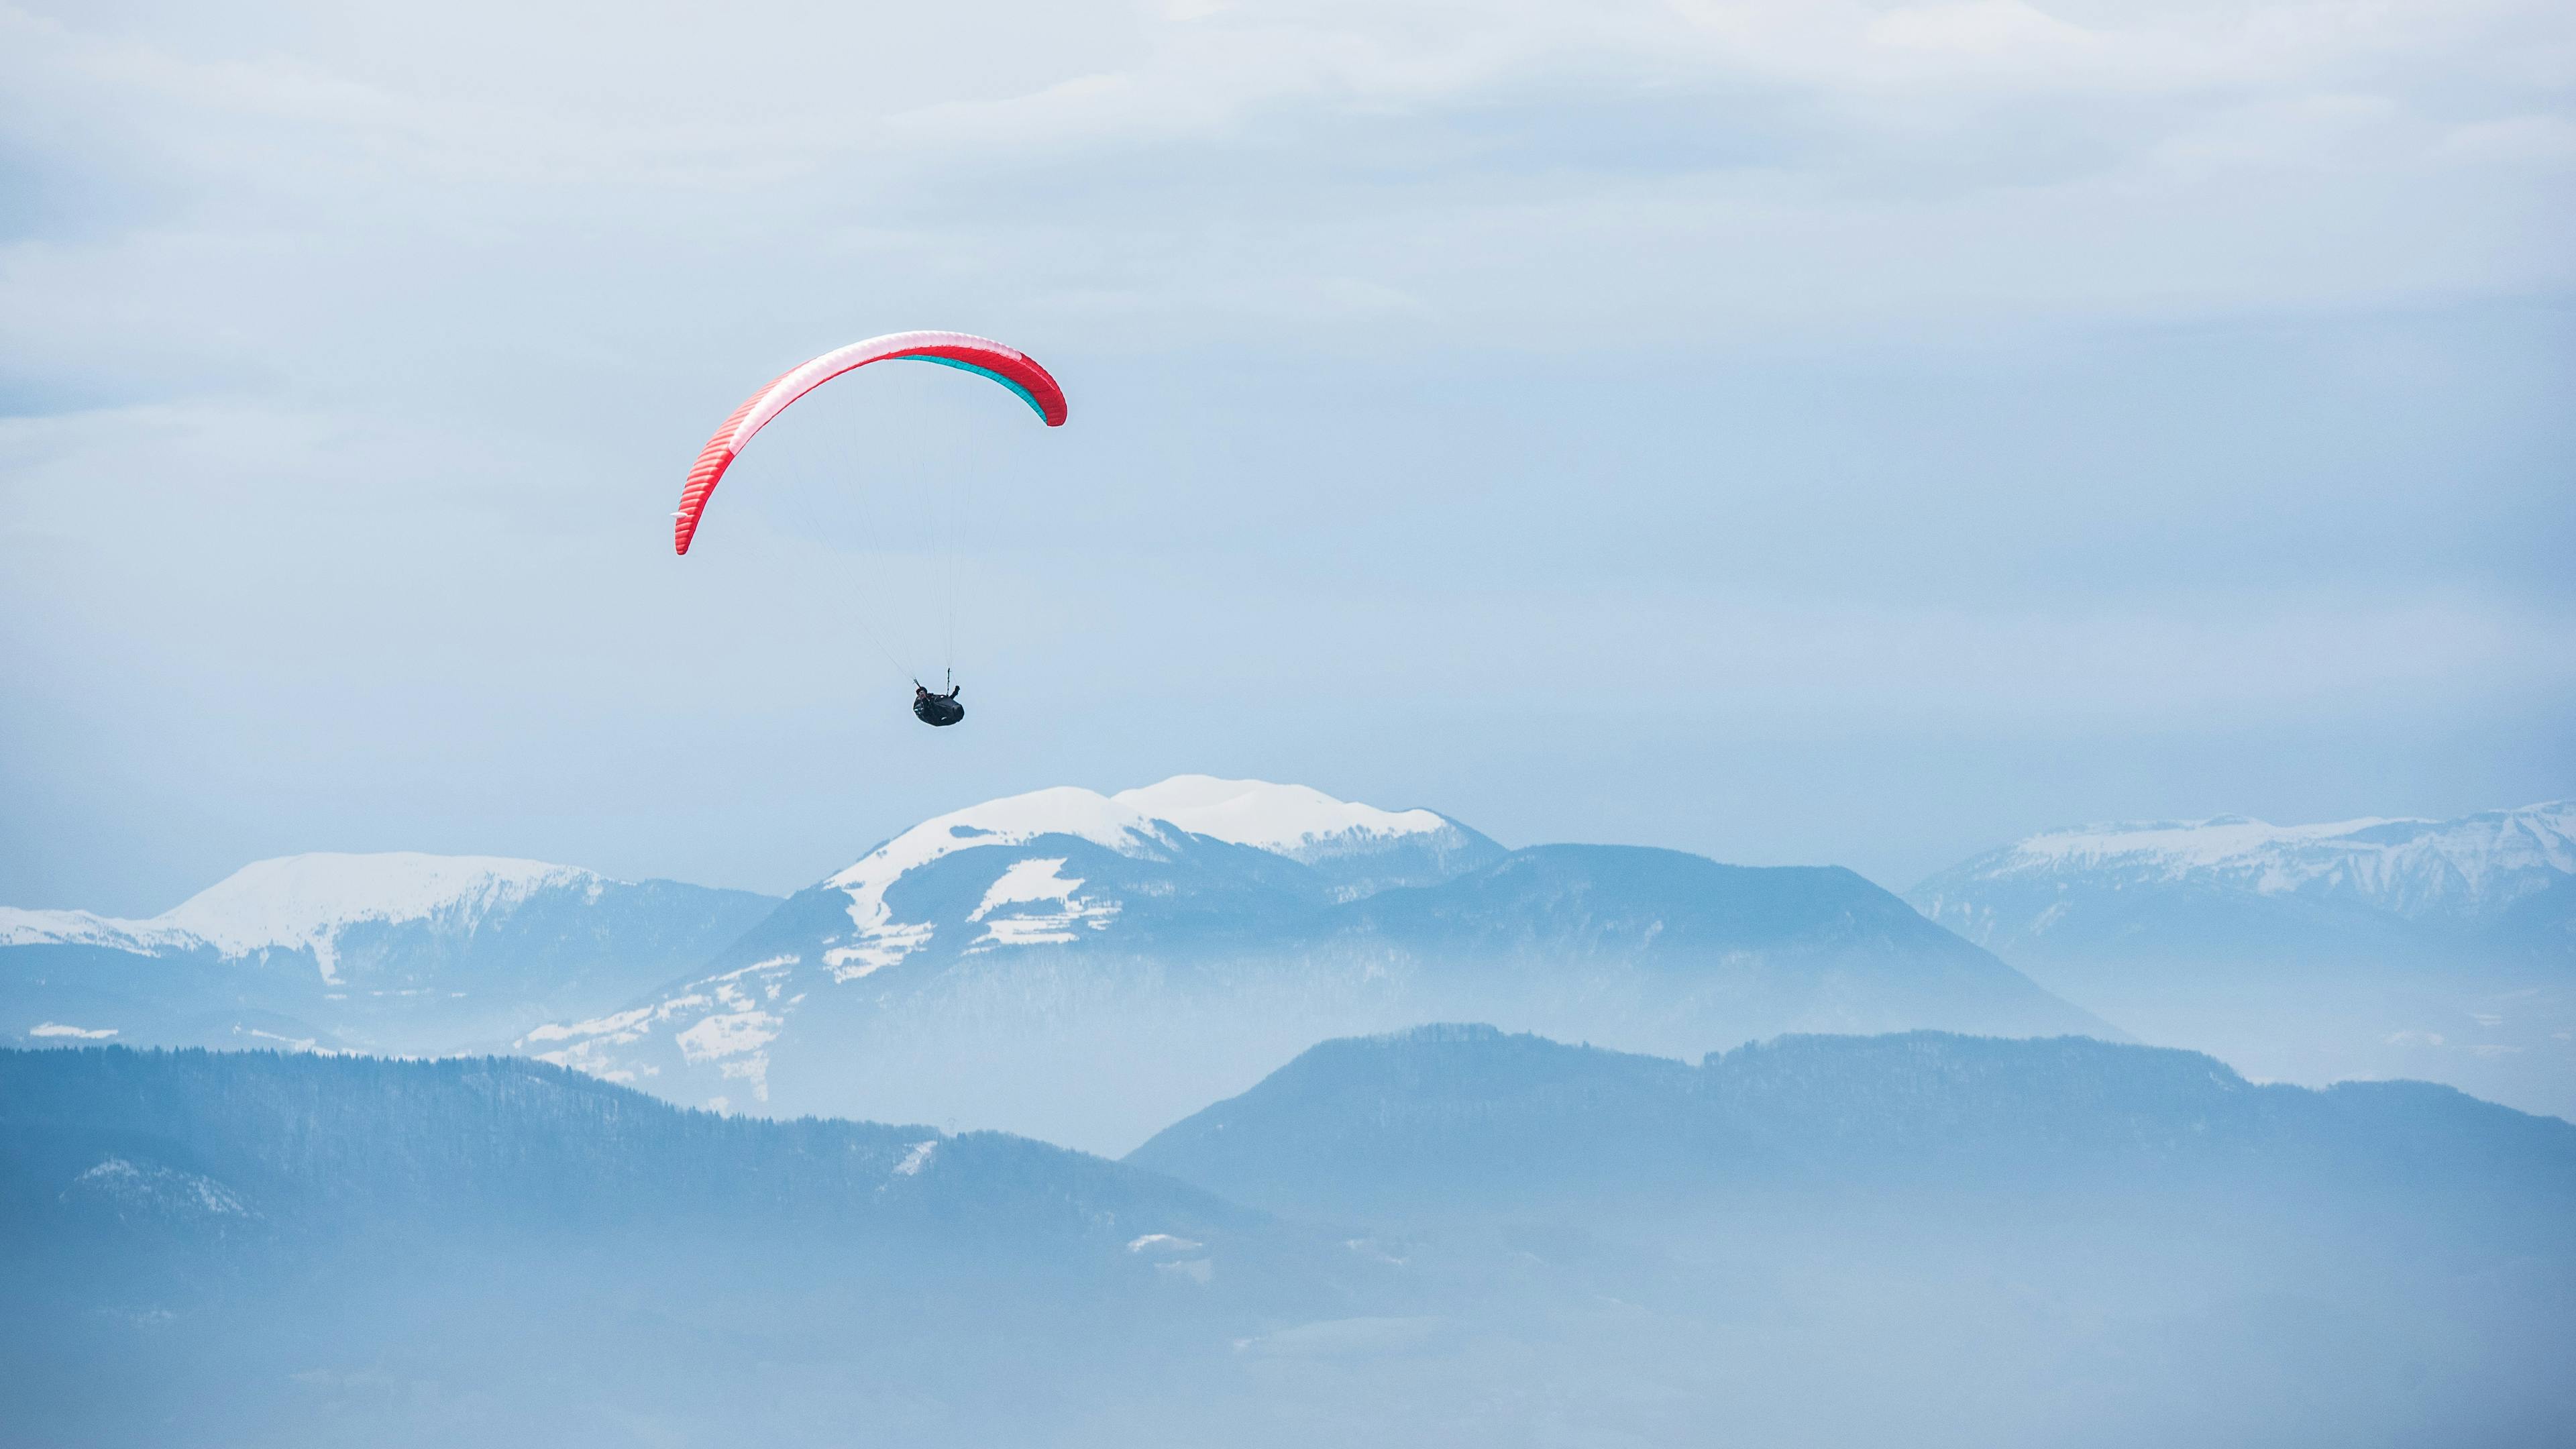 Paraglider enjoying scenic views over snowy mountains